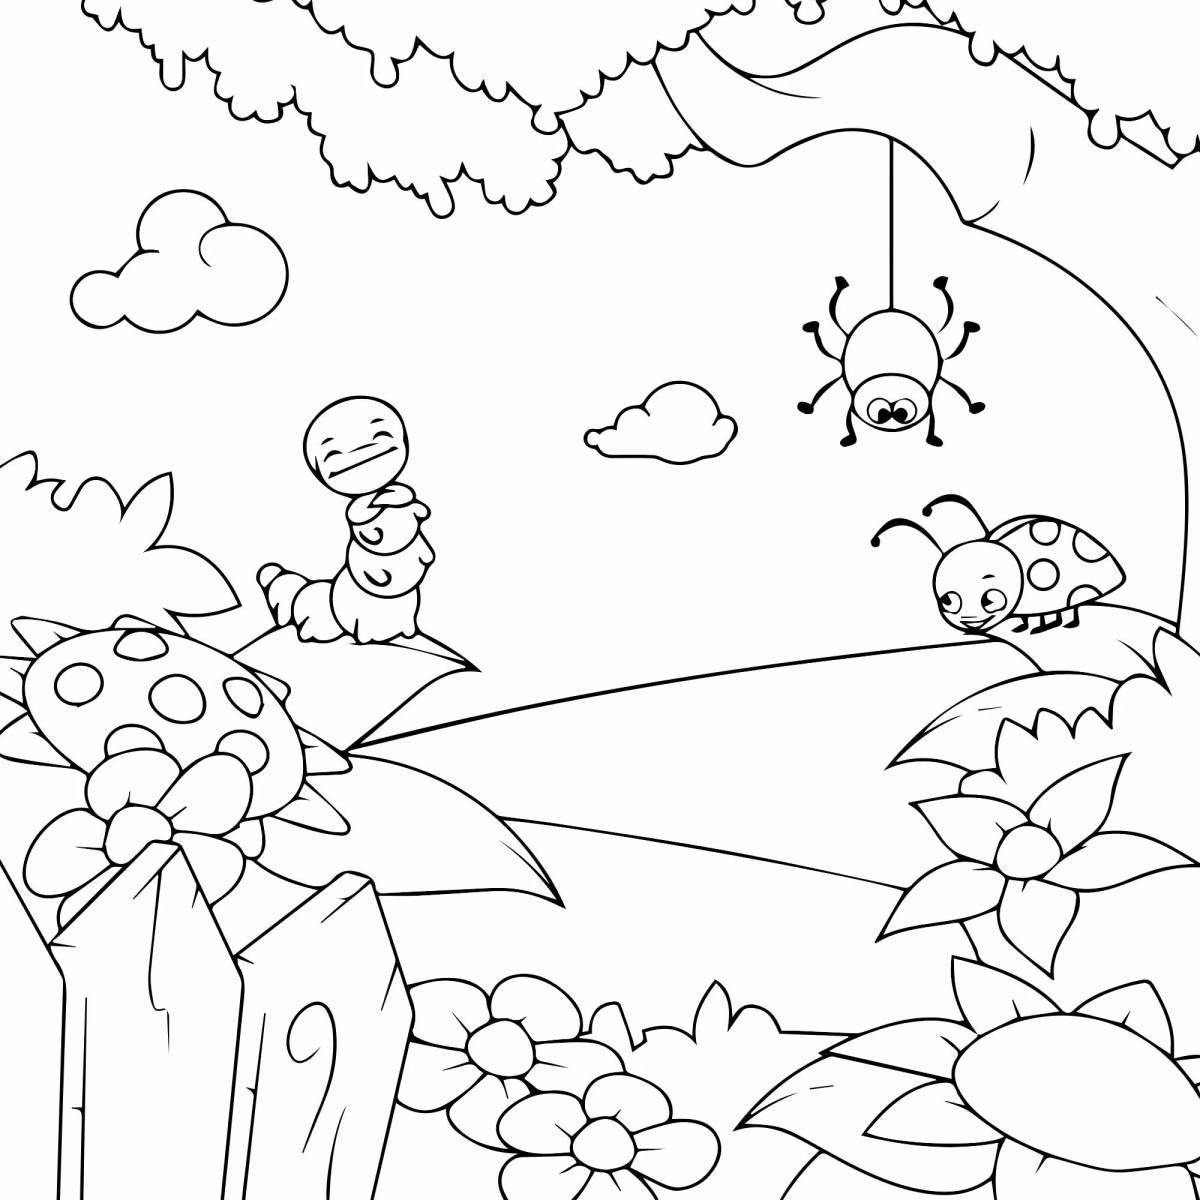 Peace cleanup coloring page